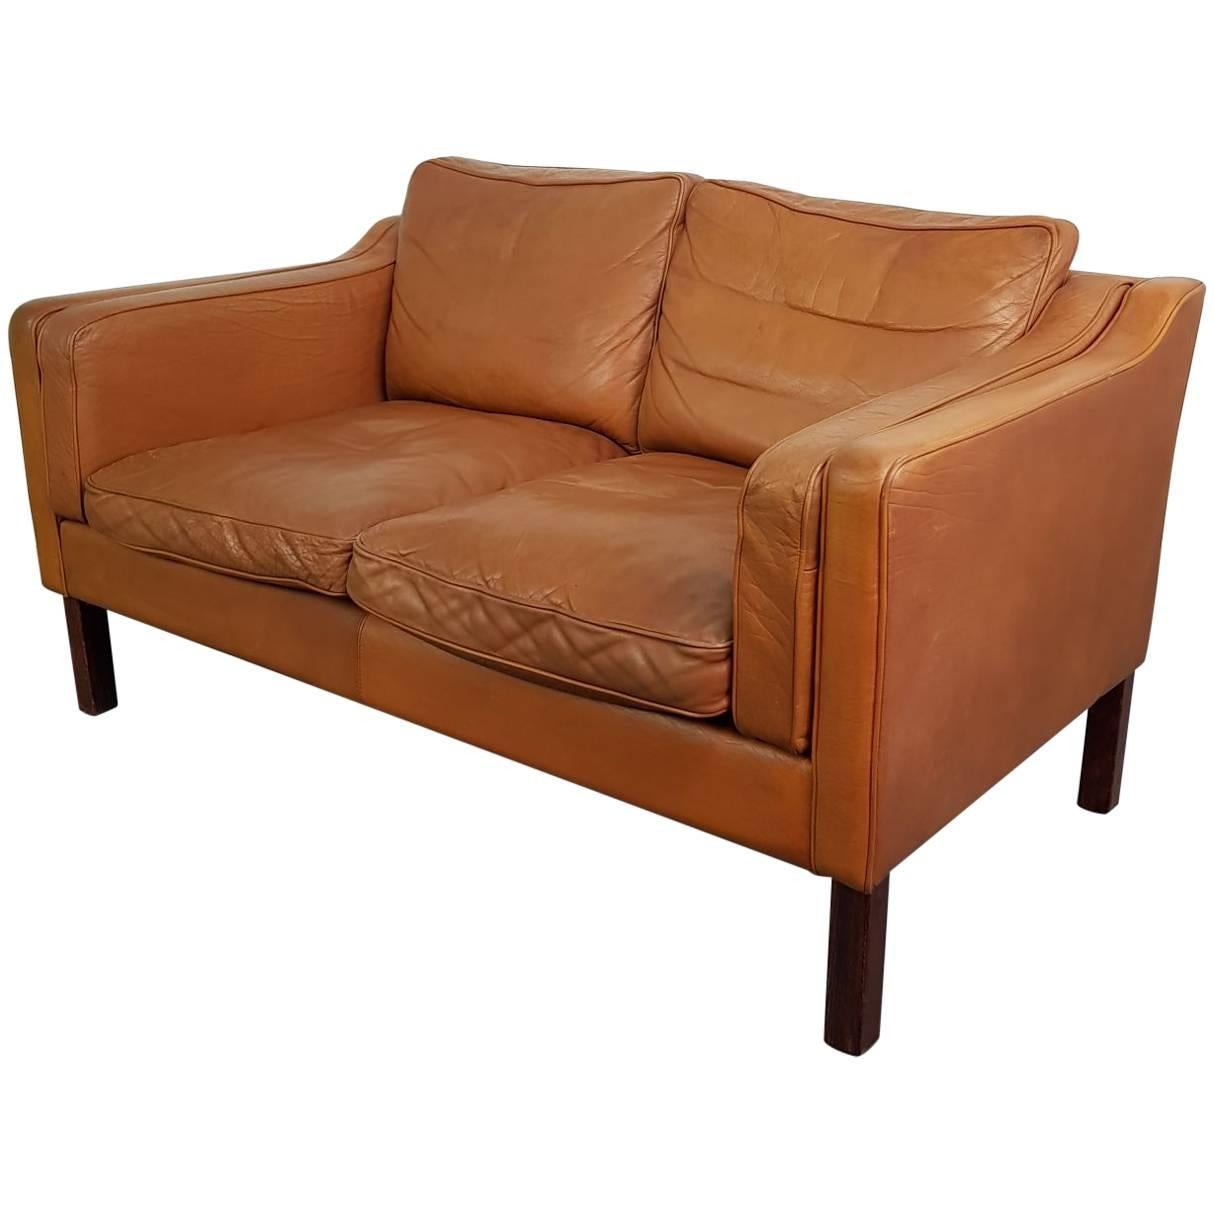 1970s Tan Brown Leather Mogensen Style Two-Seat Sofa For Sale